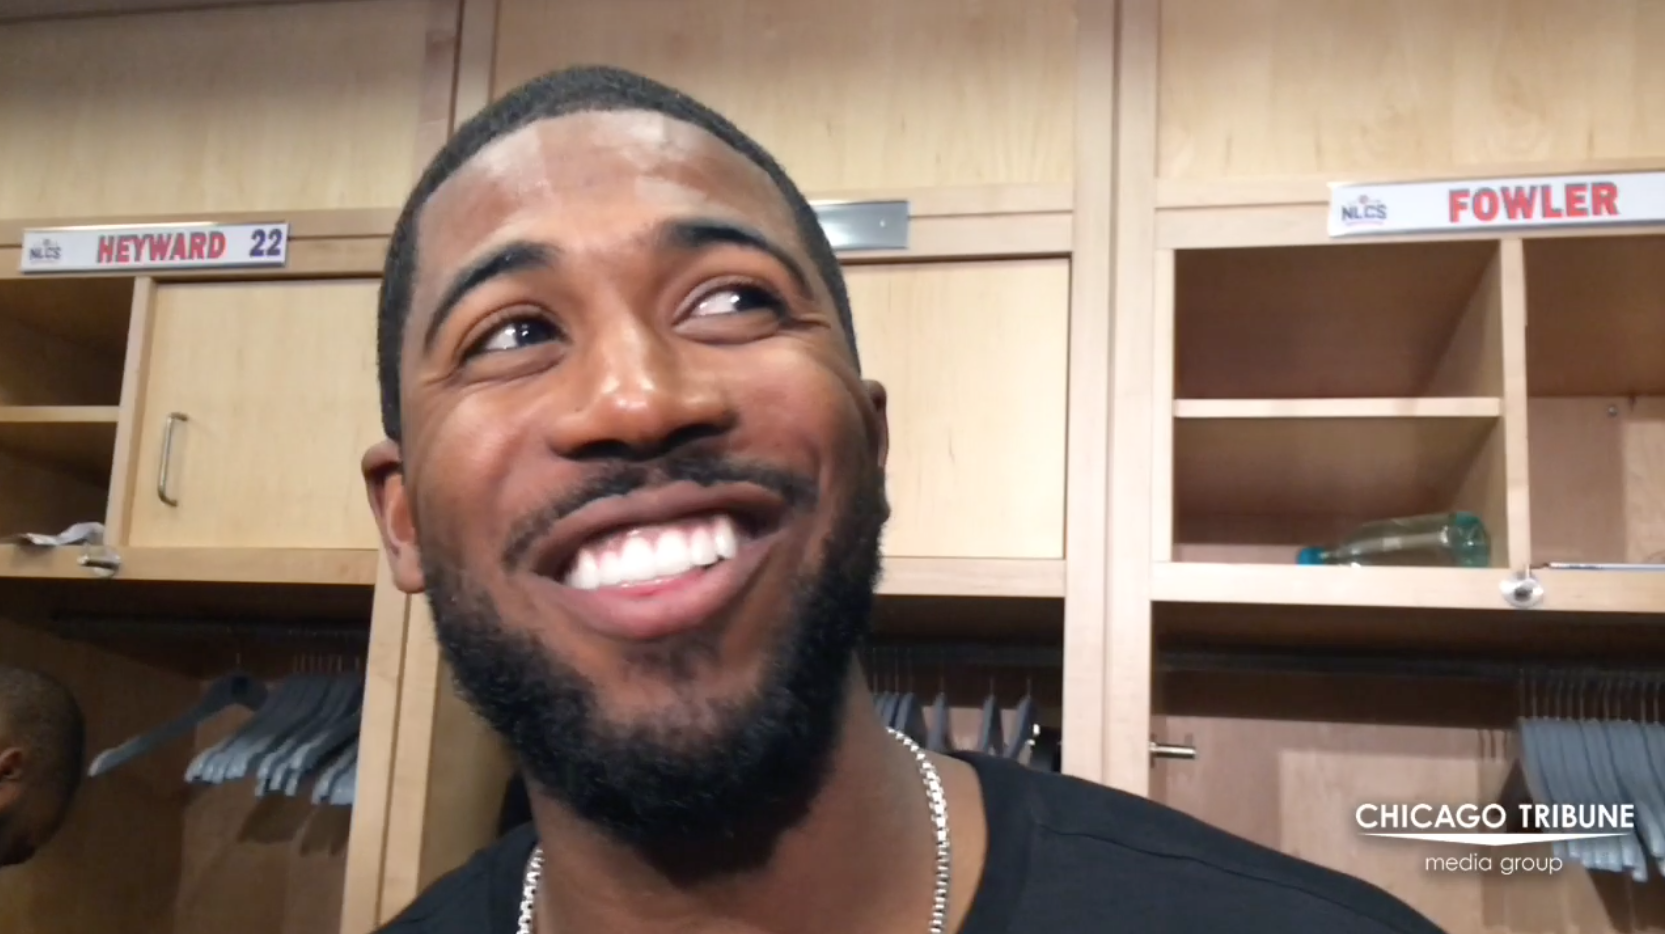 Dexter Fowler: 'We're trying to make history'